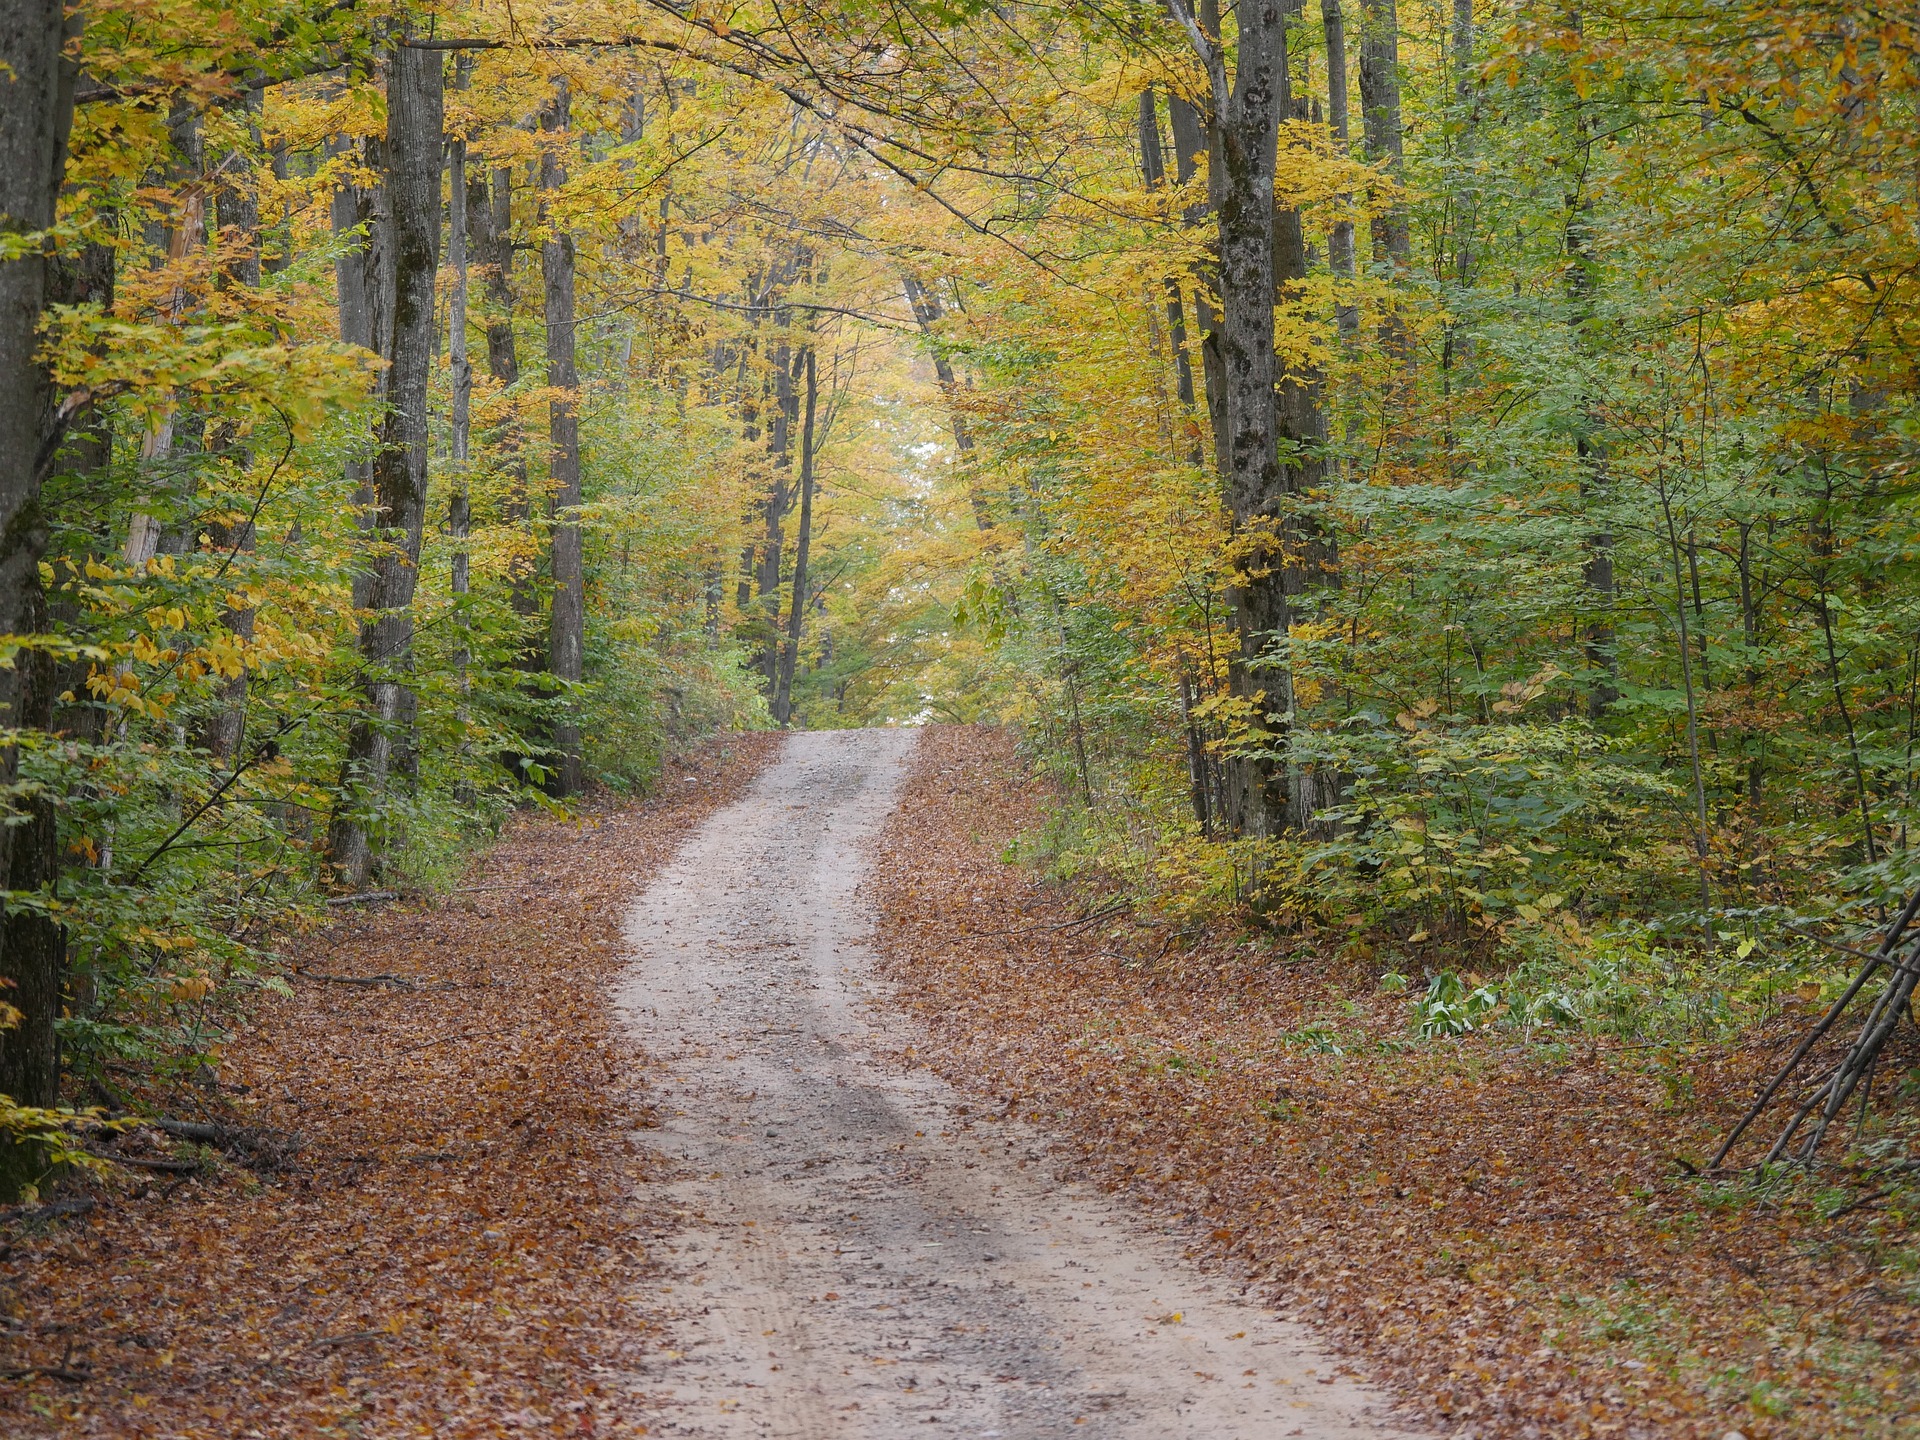 A wooded hiking trail in fall.